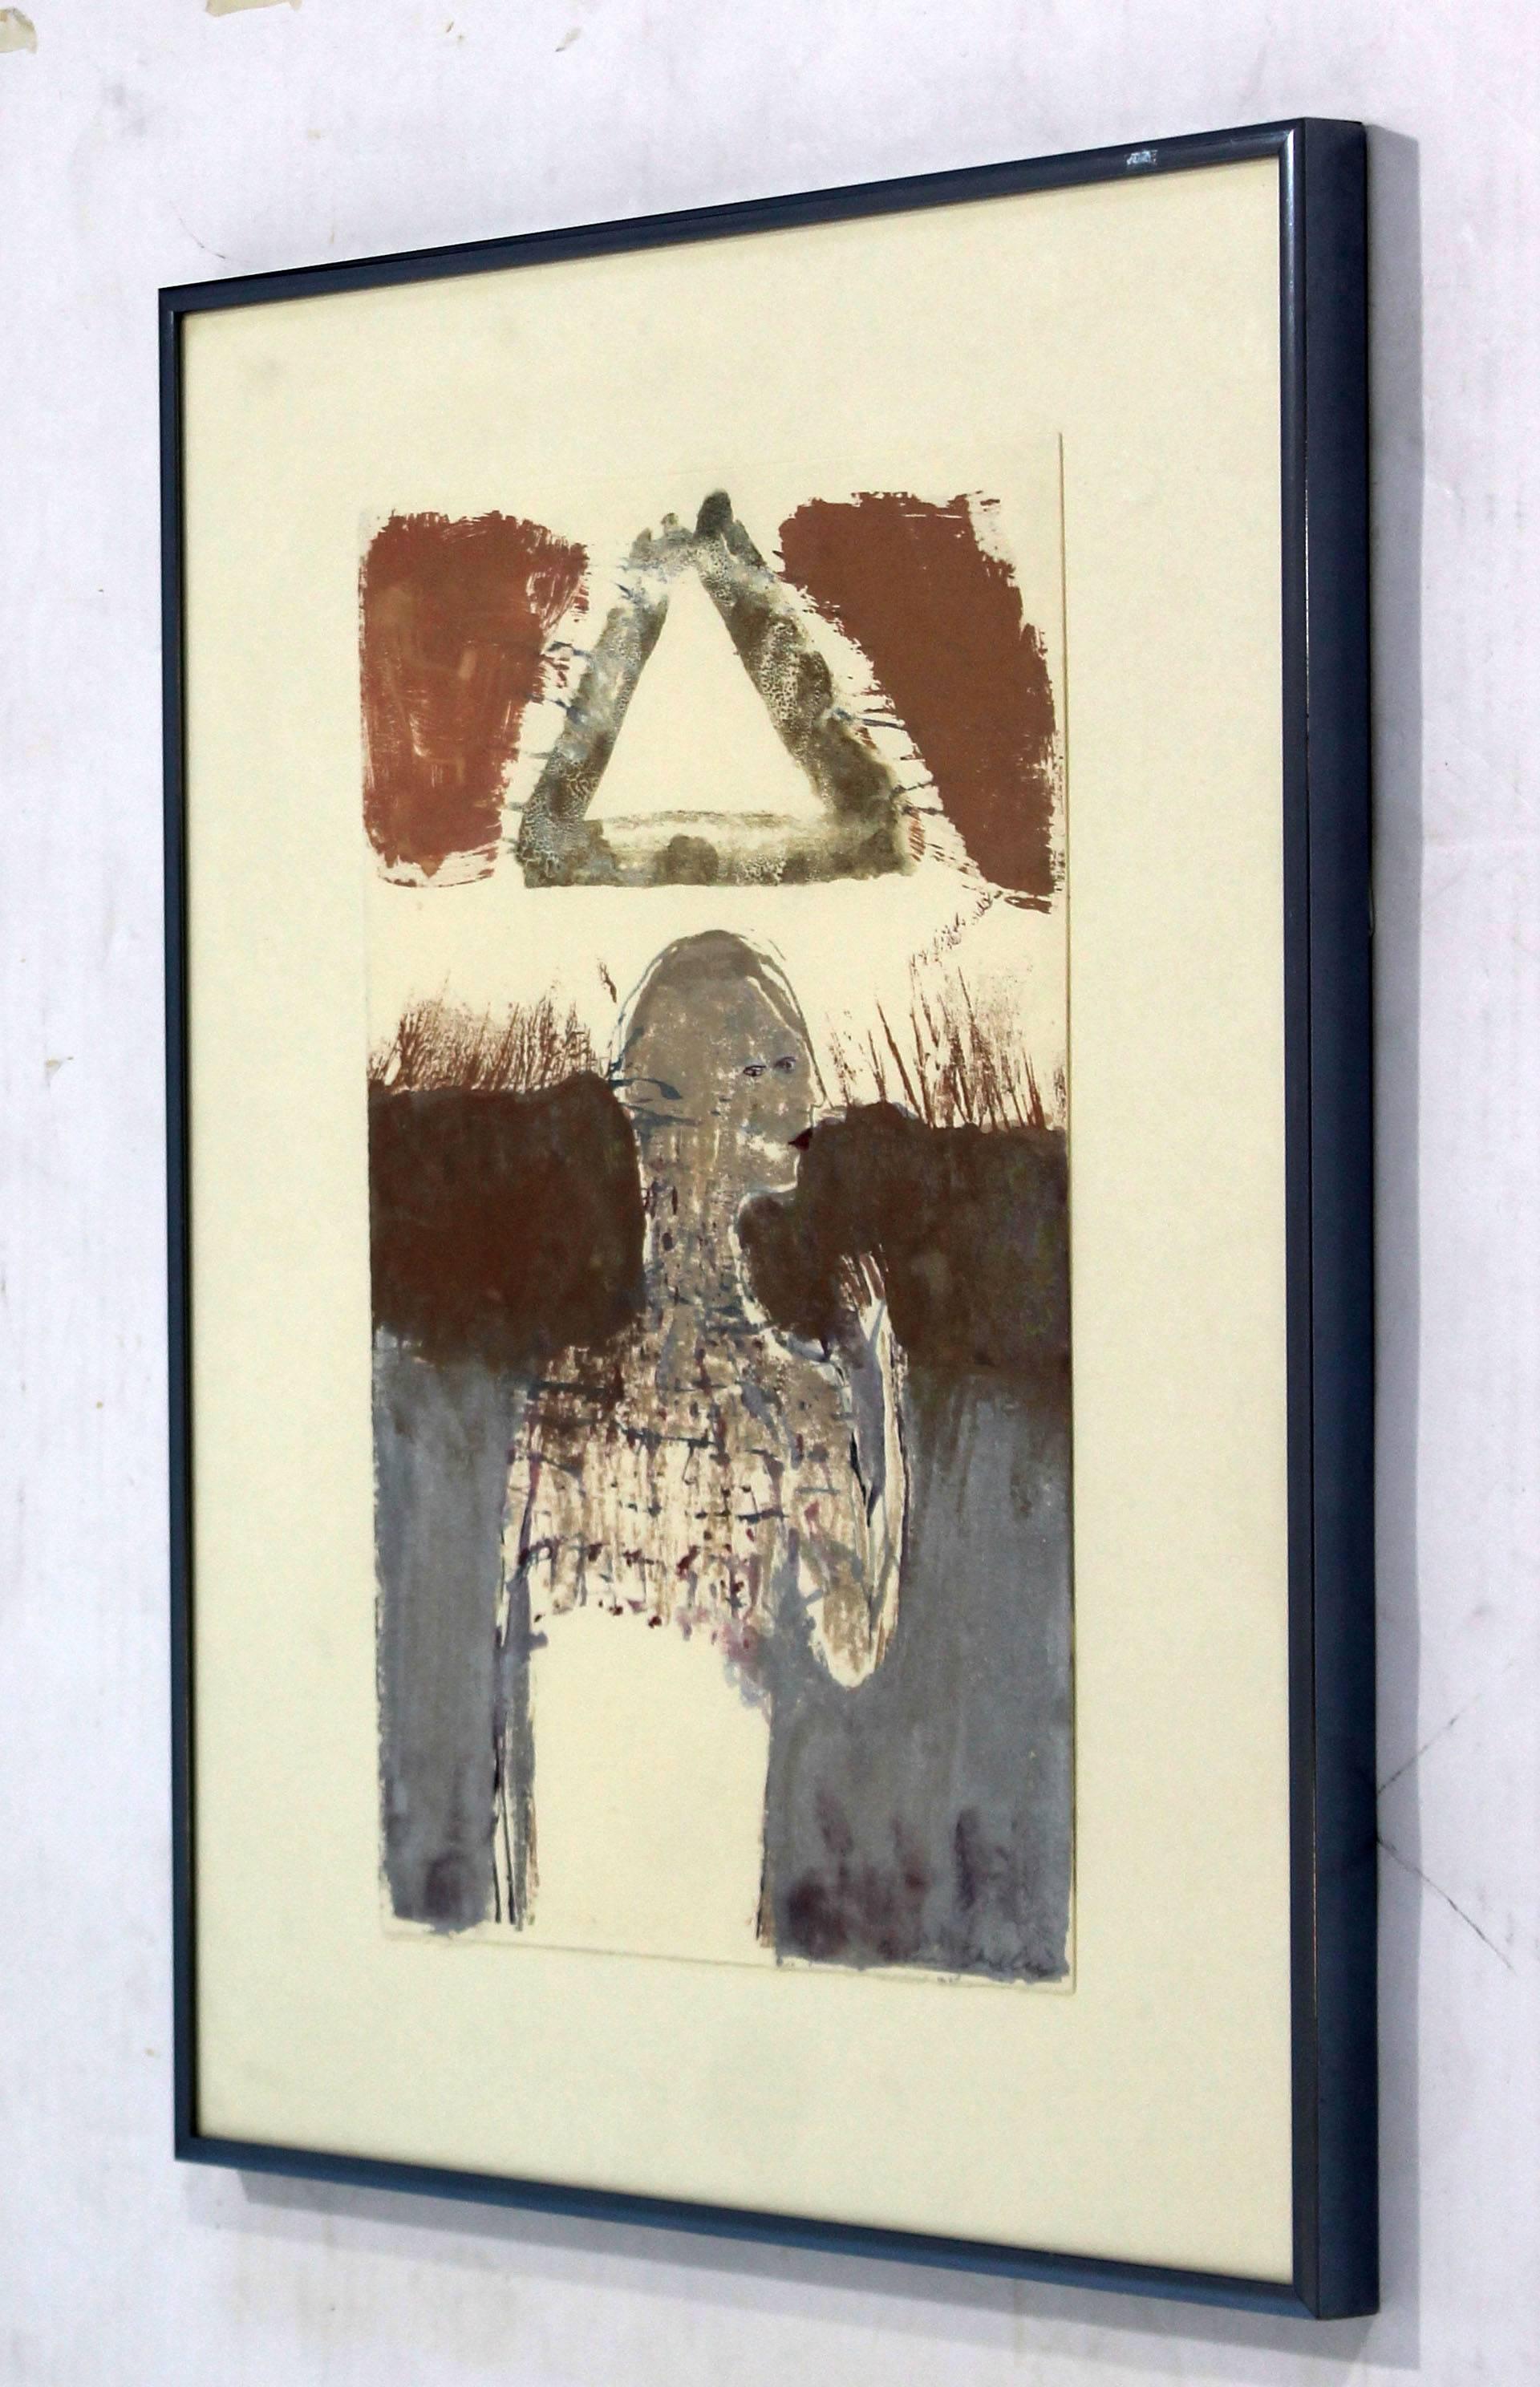 Mid-Century Modern Contemporary Framed Signed Sean Scully Aquatint Etching Signed Surrealist 1991